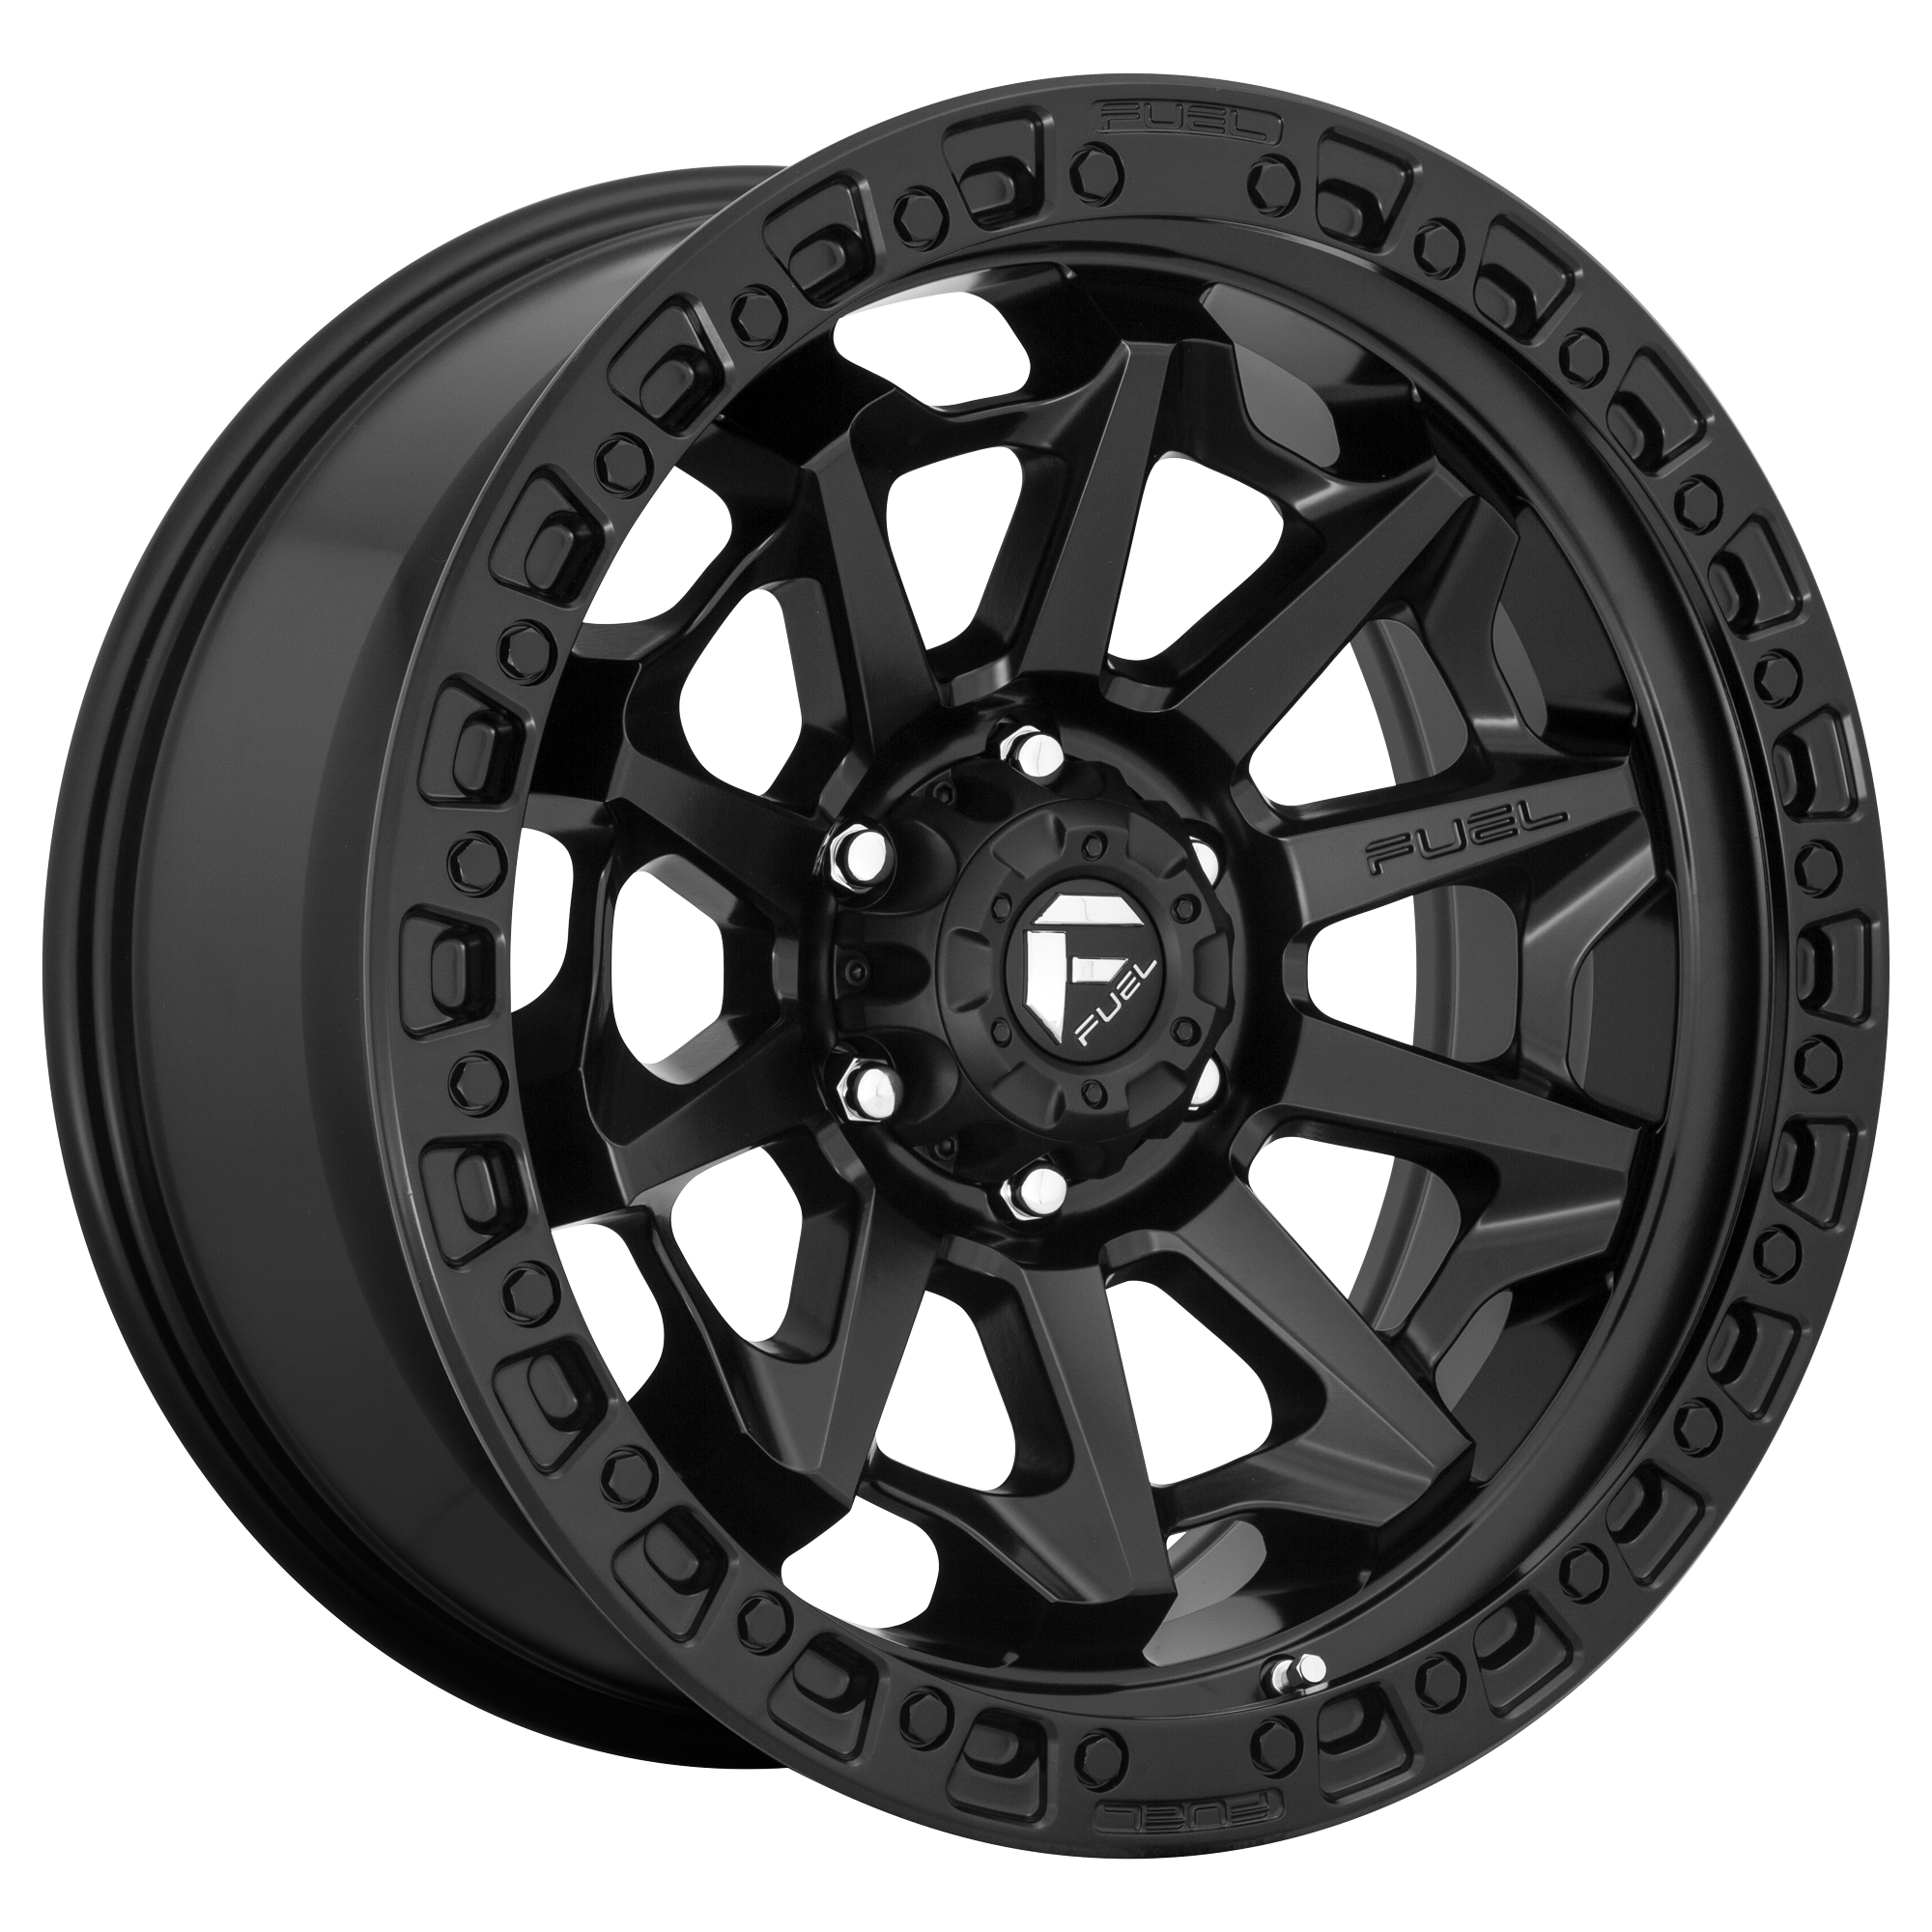 COVERT 17x9 5x127.00 MATTE BLACK (-12 mm) - Tires and Engine Performance